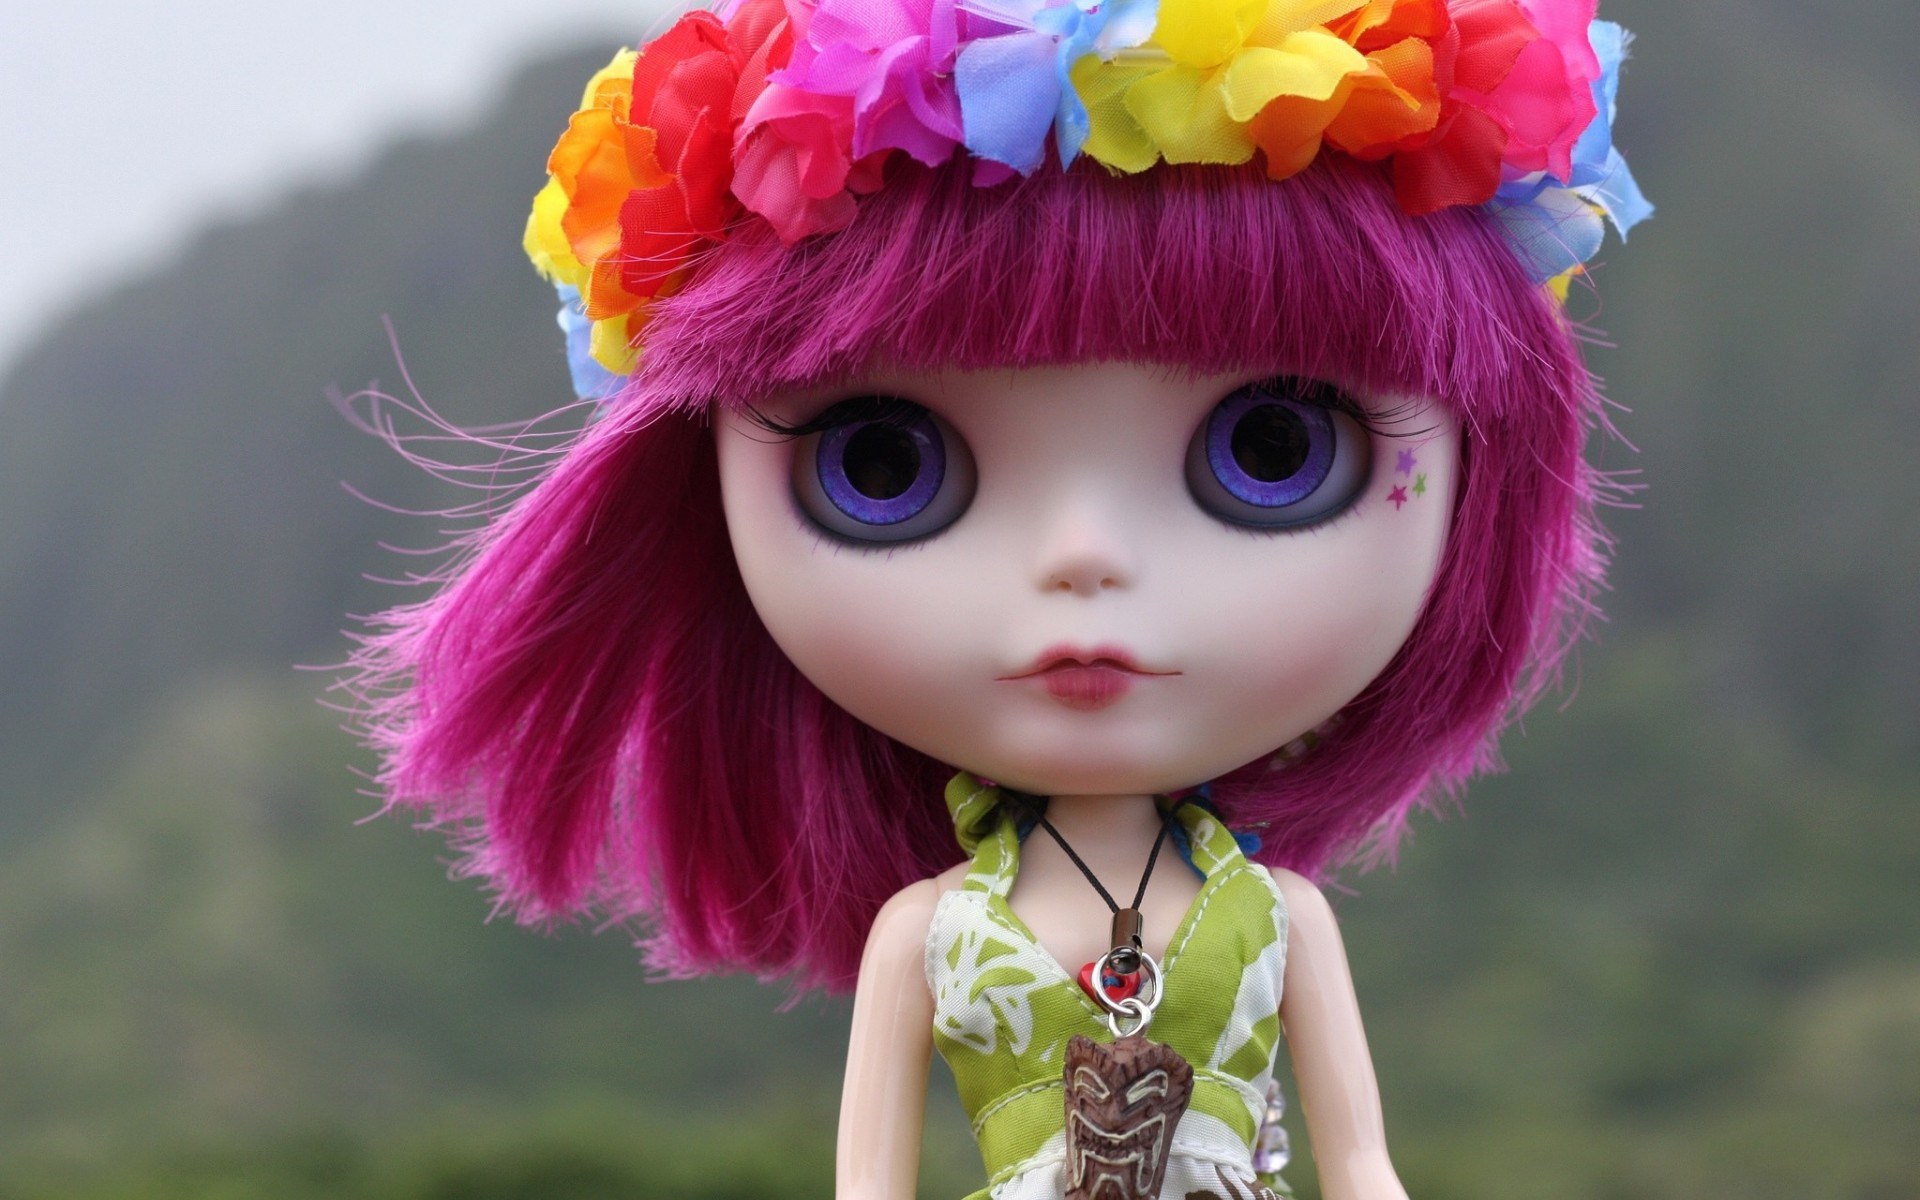 Colorful Toy Doll Wallpaper 42431